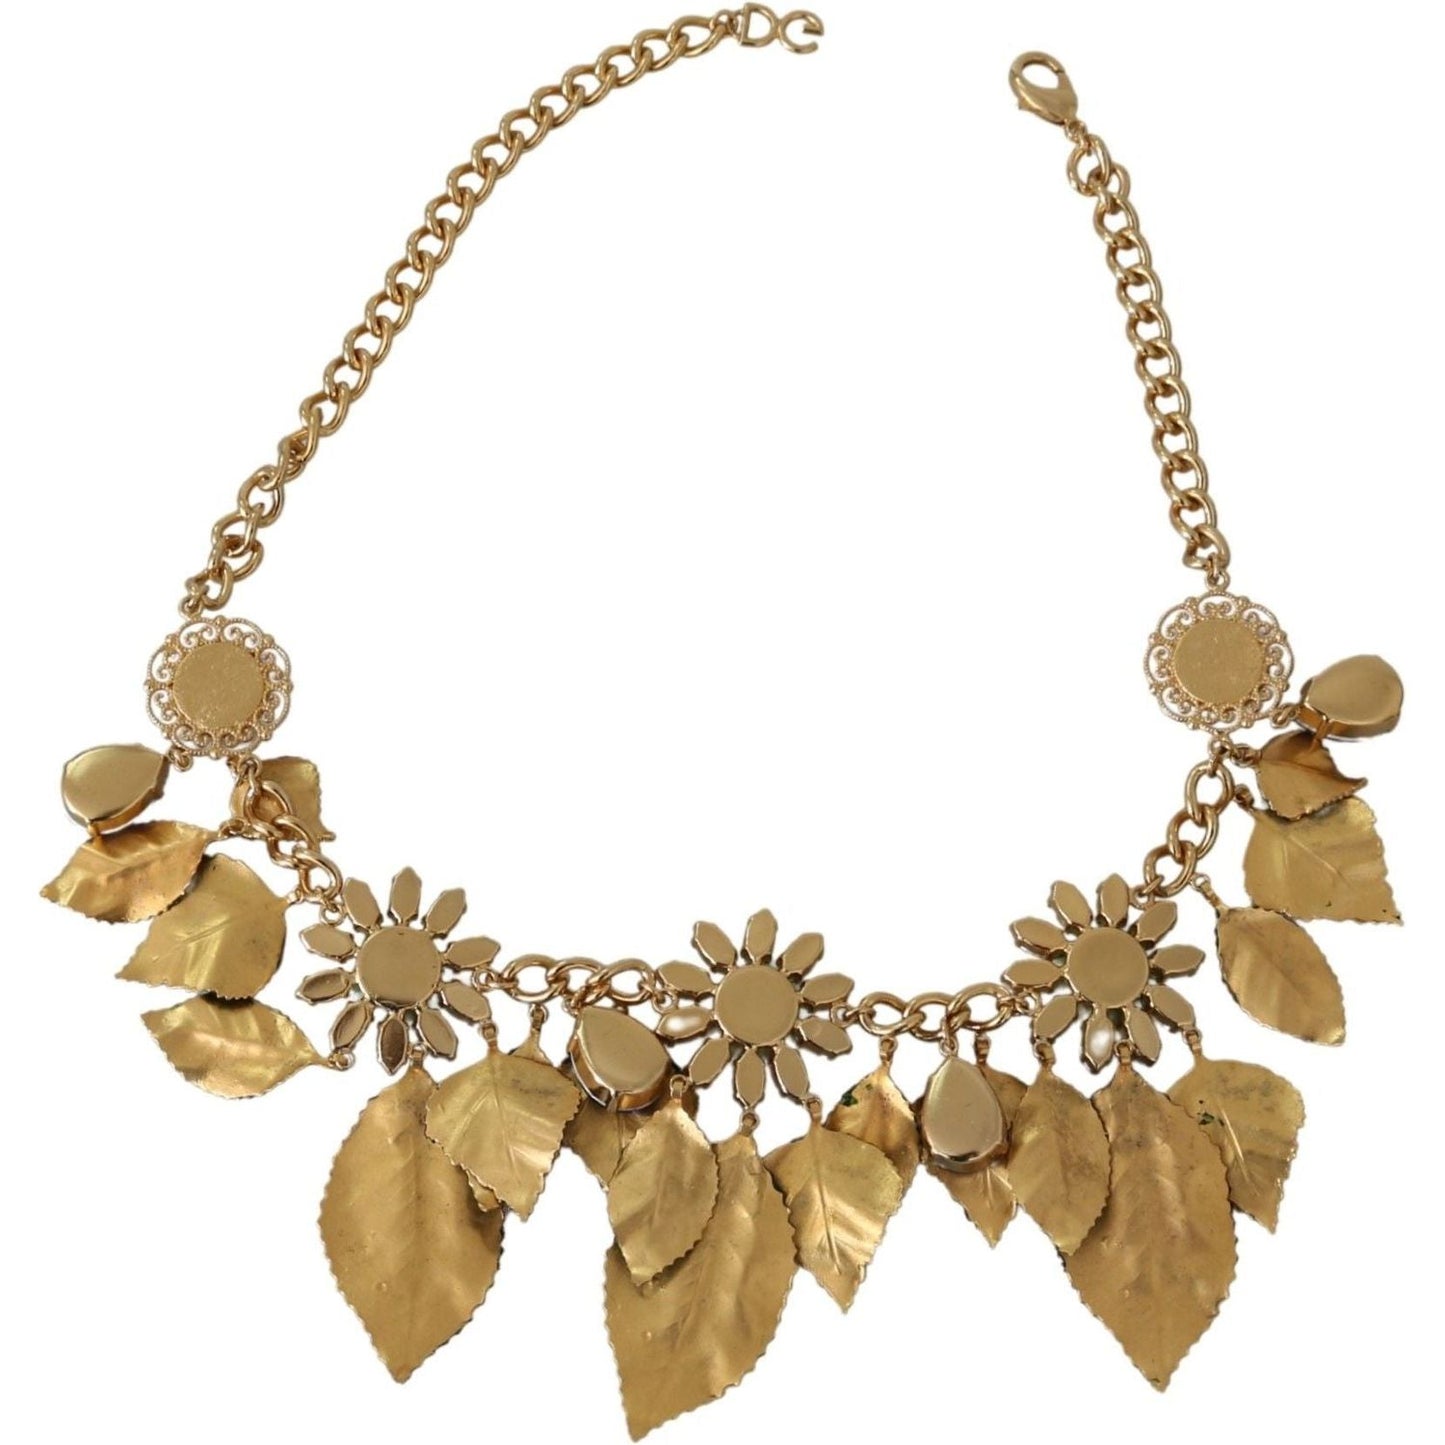 Dolce & Gabbana Elegant Crystal Charms Leaves Pendant Necklace Necklace green-leaves-gold-brass-crystal-flower-pendant-necklace IMG_2899-2e01a12e-950.jpg